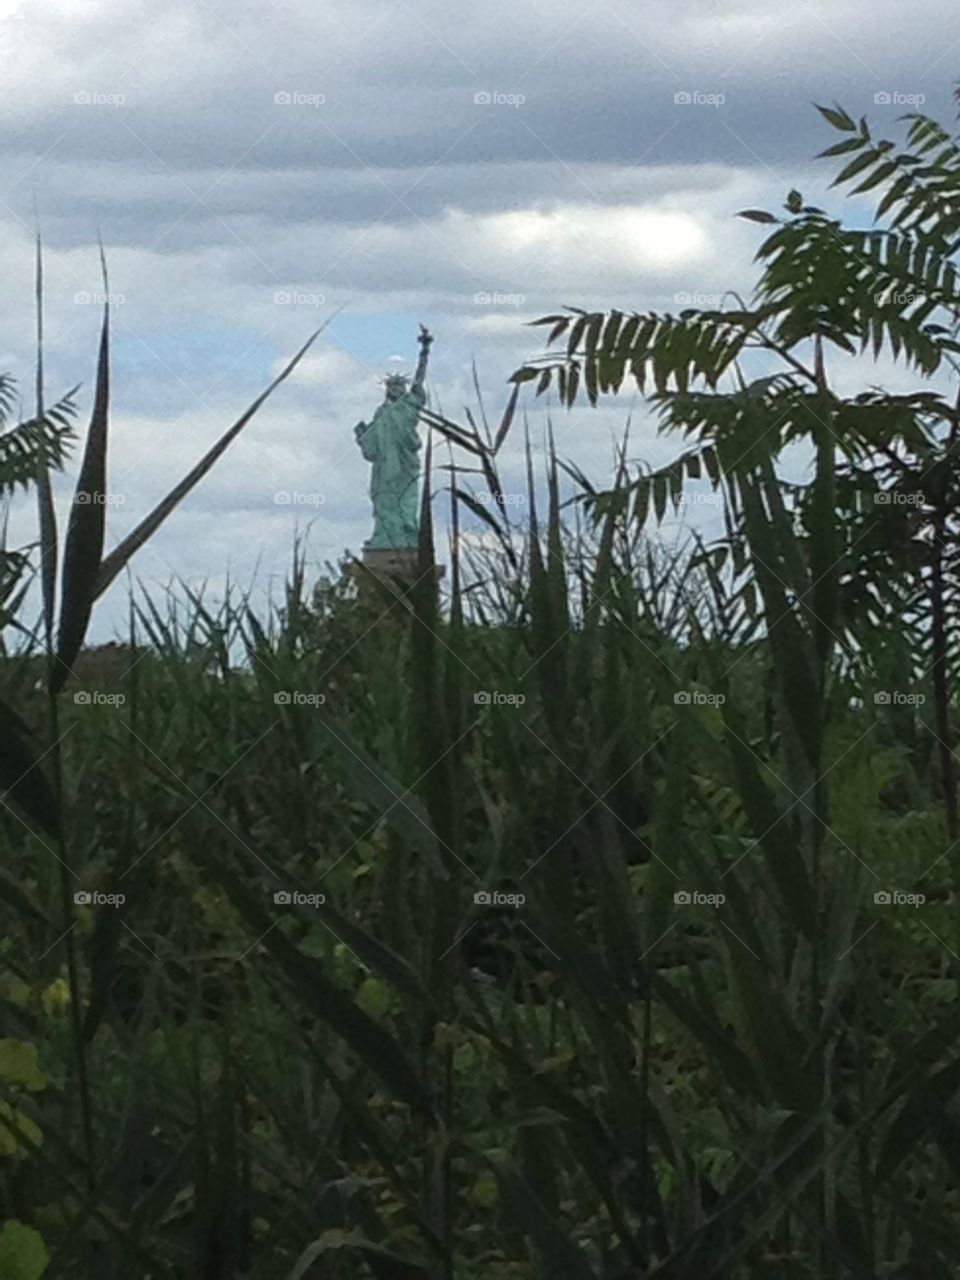 Statue of Liberty from Jersey. Marsh grass in forefront. 